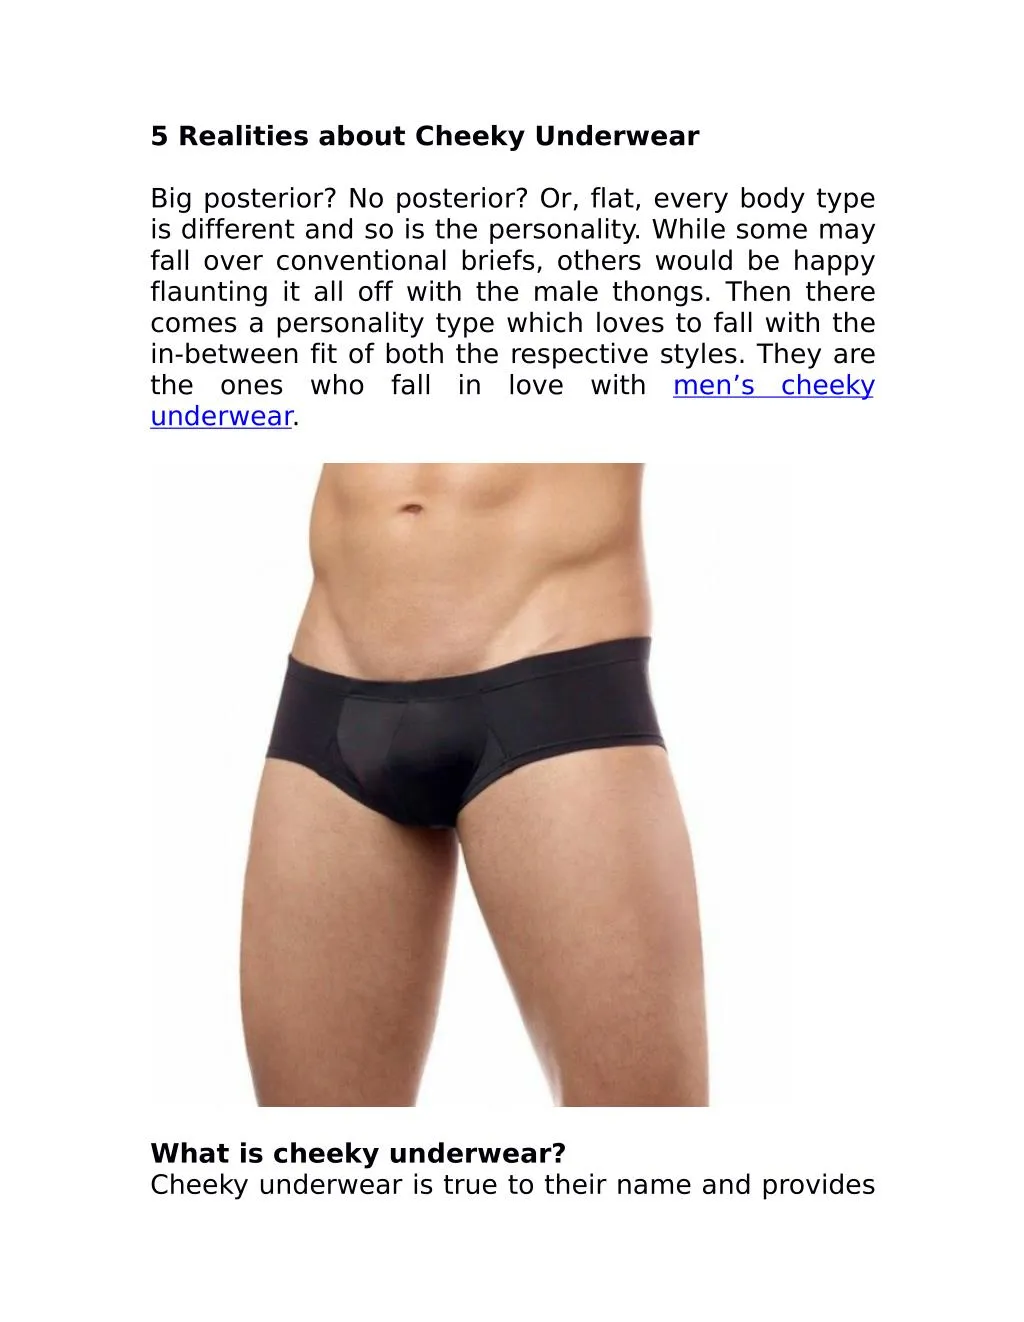 5 realities about cheeky underwear